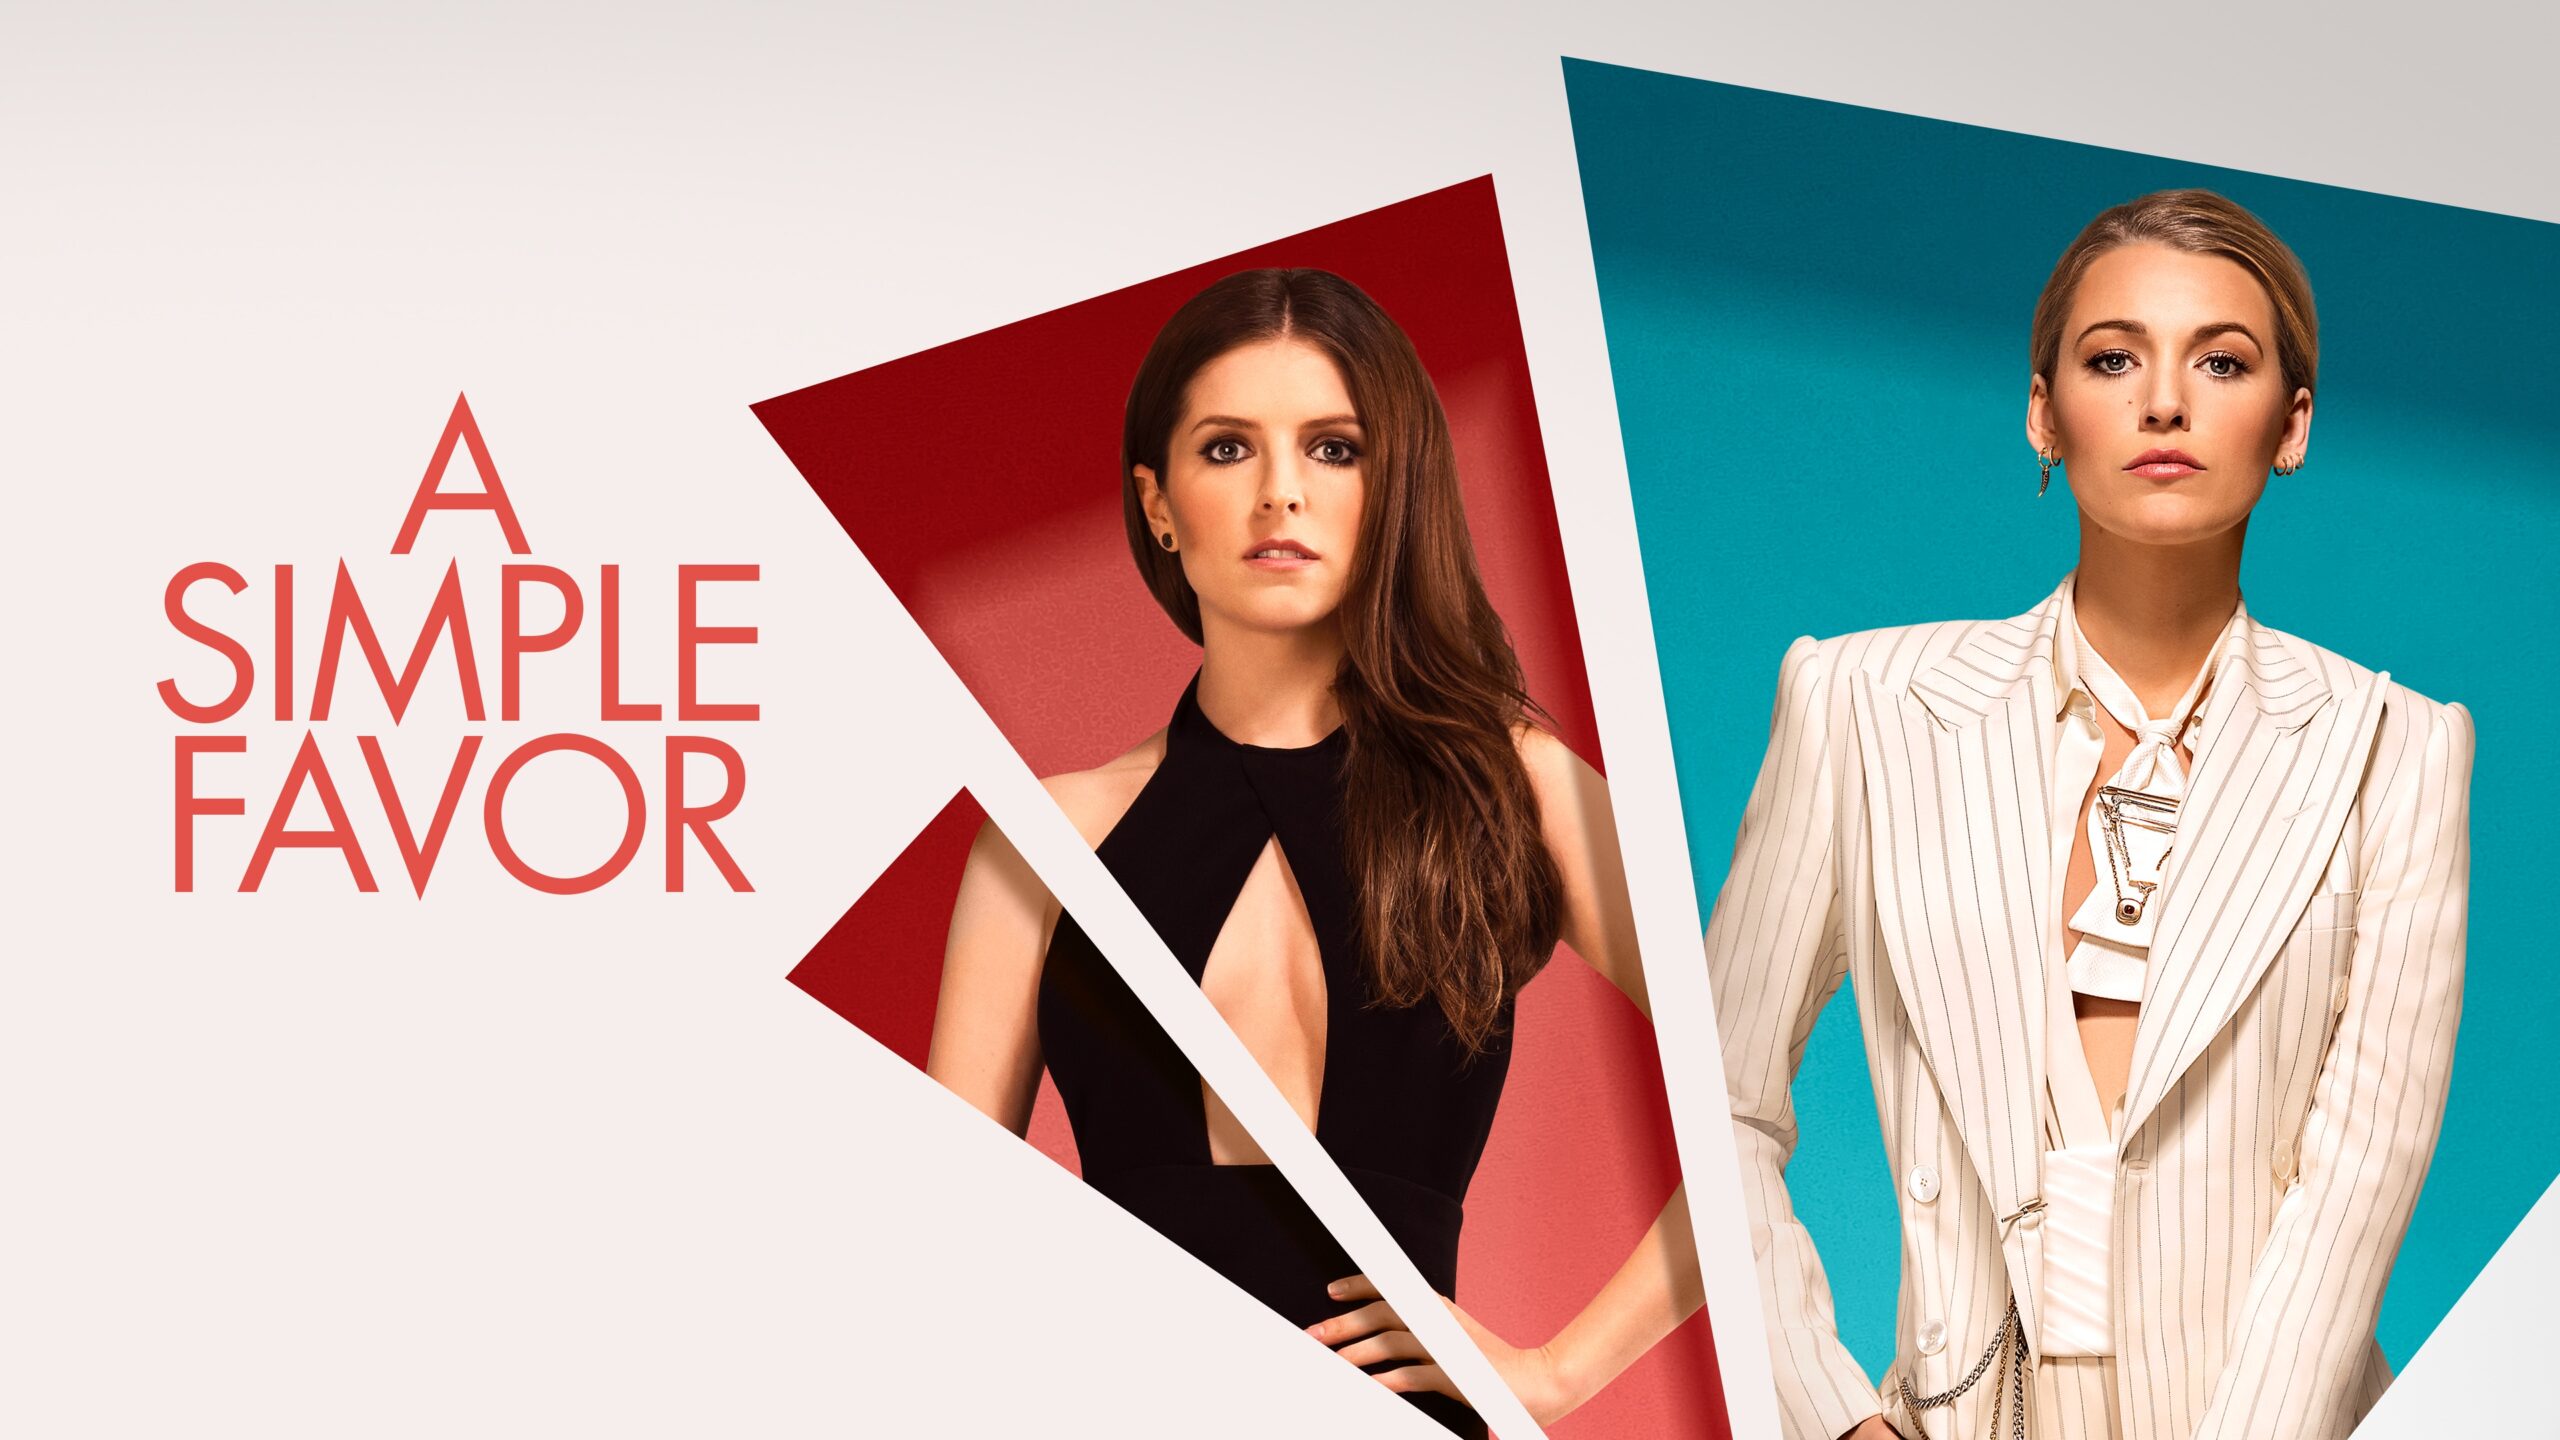 Anna Kendrick A Simple Favor 2018 Movie Poster Wallpapers